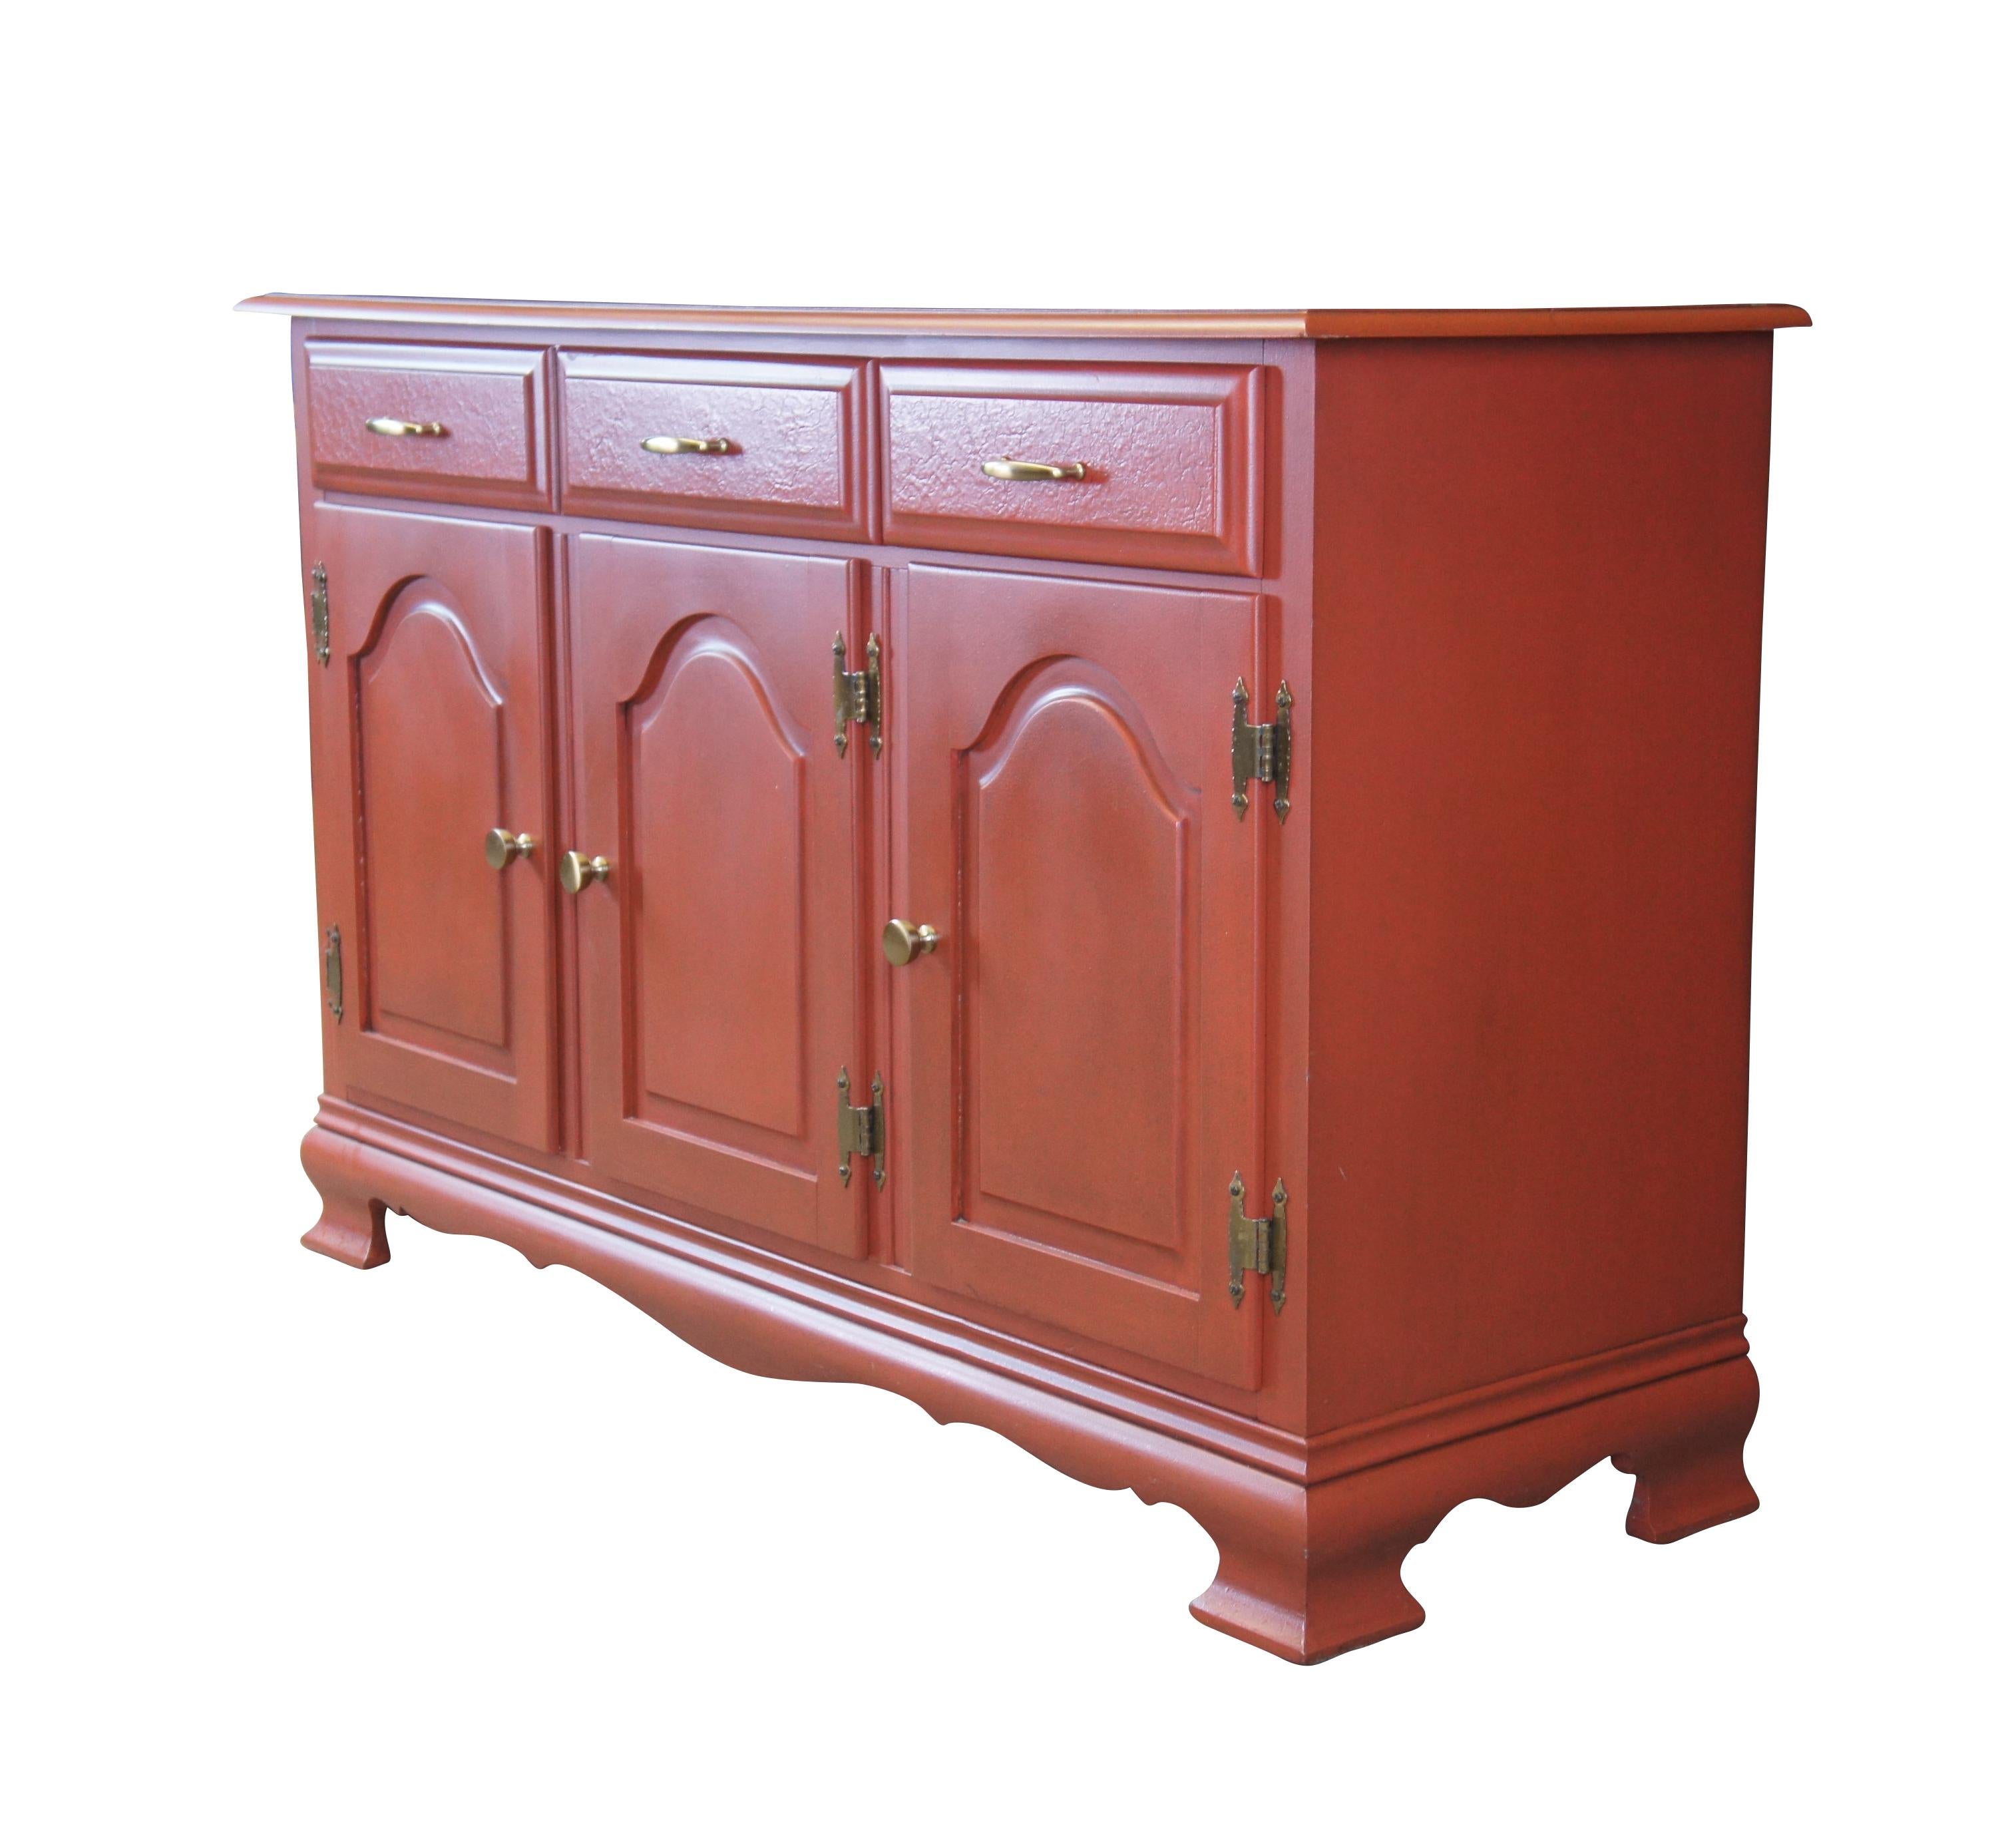 Vintage buffet, sideboard, or console cabinet featuring a red crackle painted exterior with two upper drawers and lower cabinet.